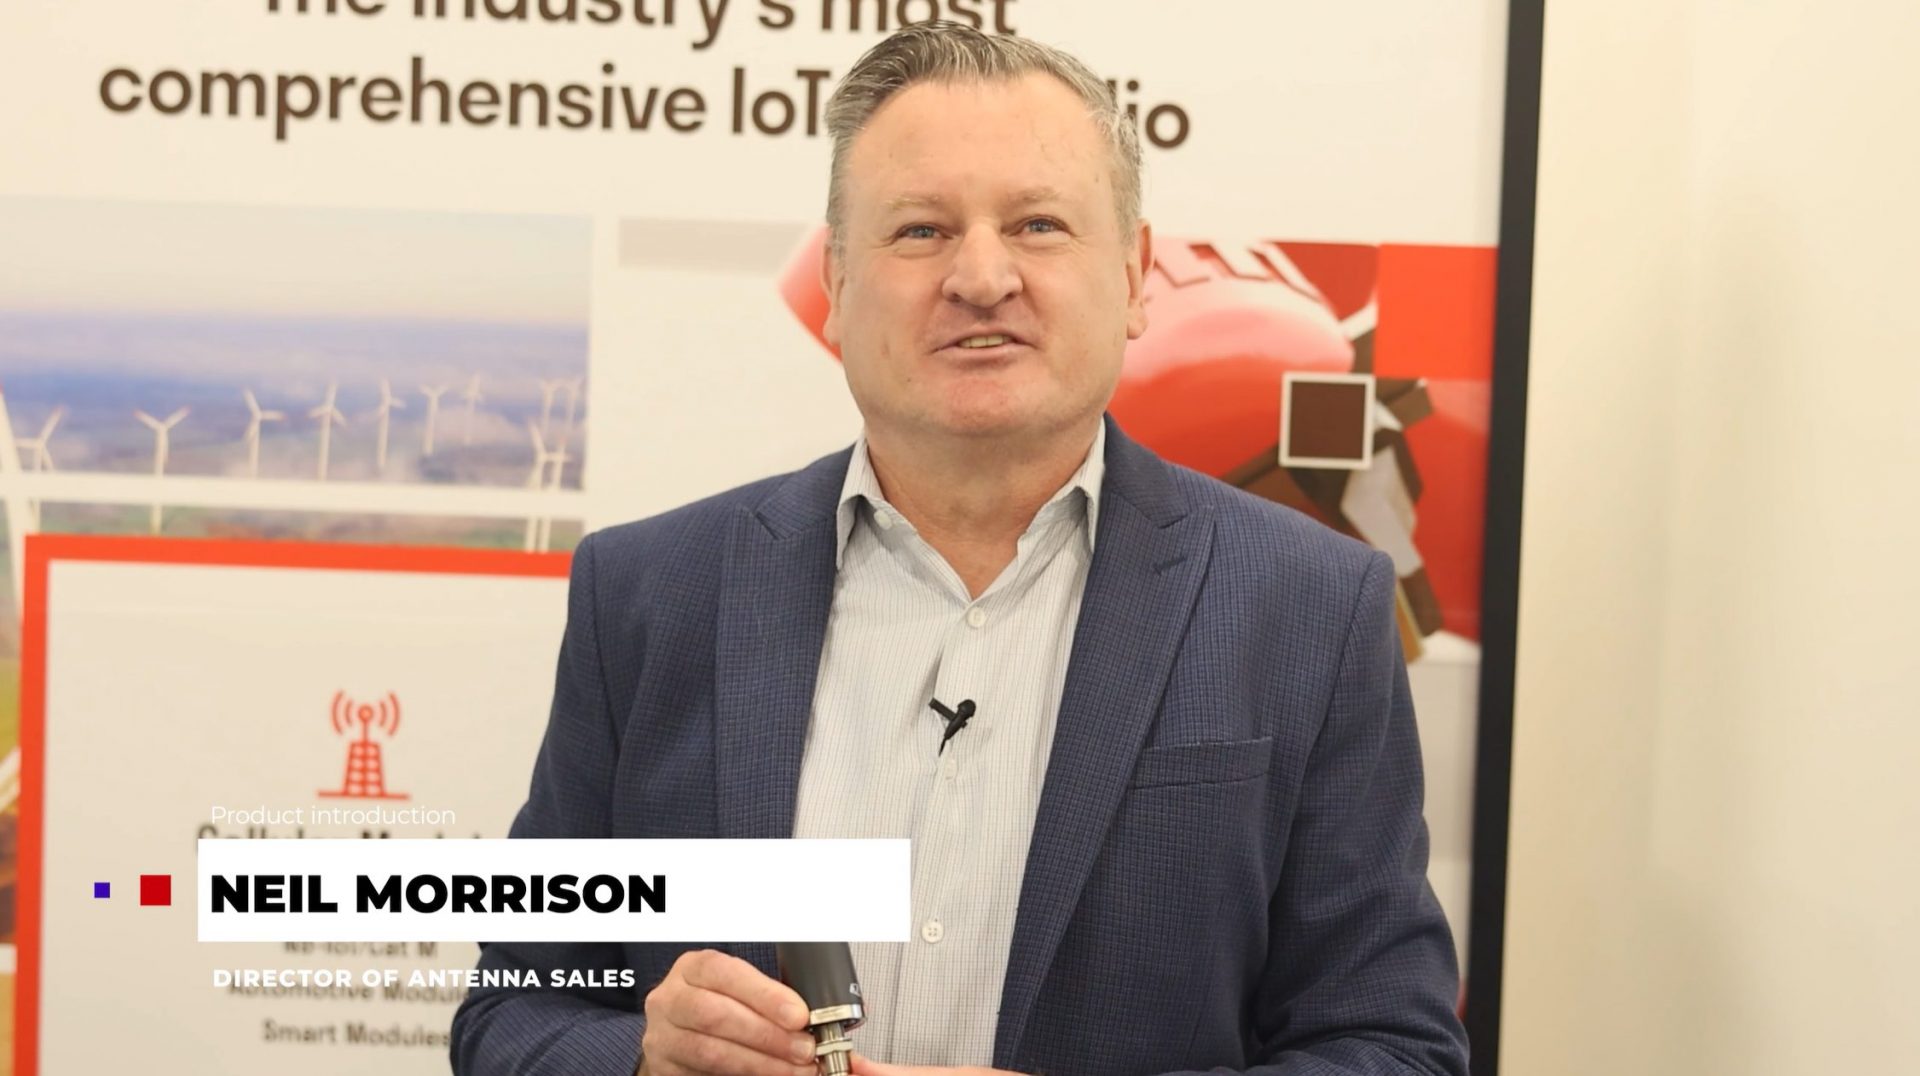 Director of Antenna Sales Neil Morrison discusses the YECT000W external 5G antenna